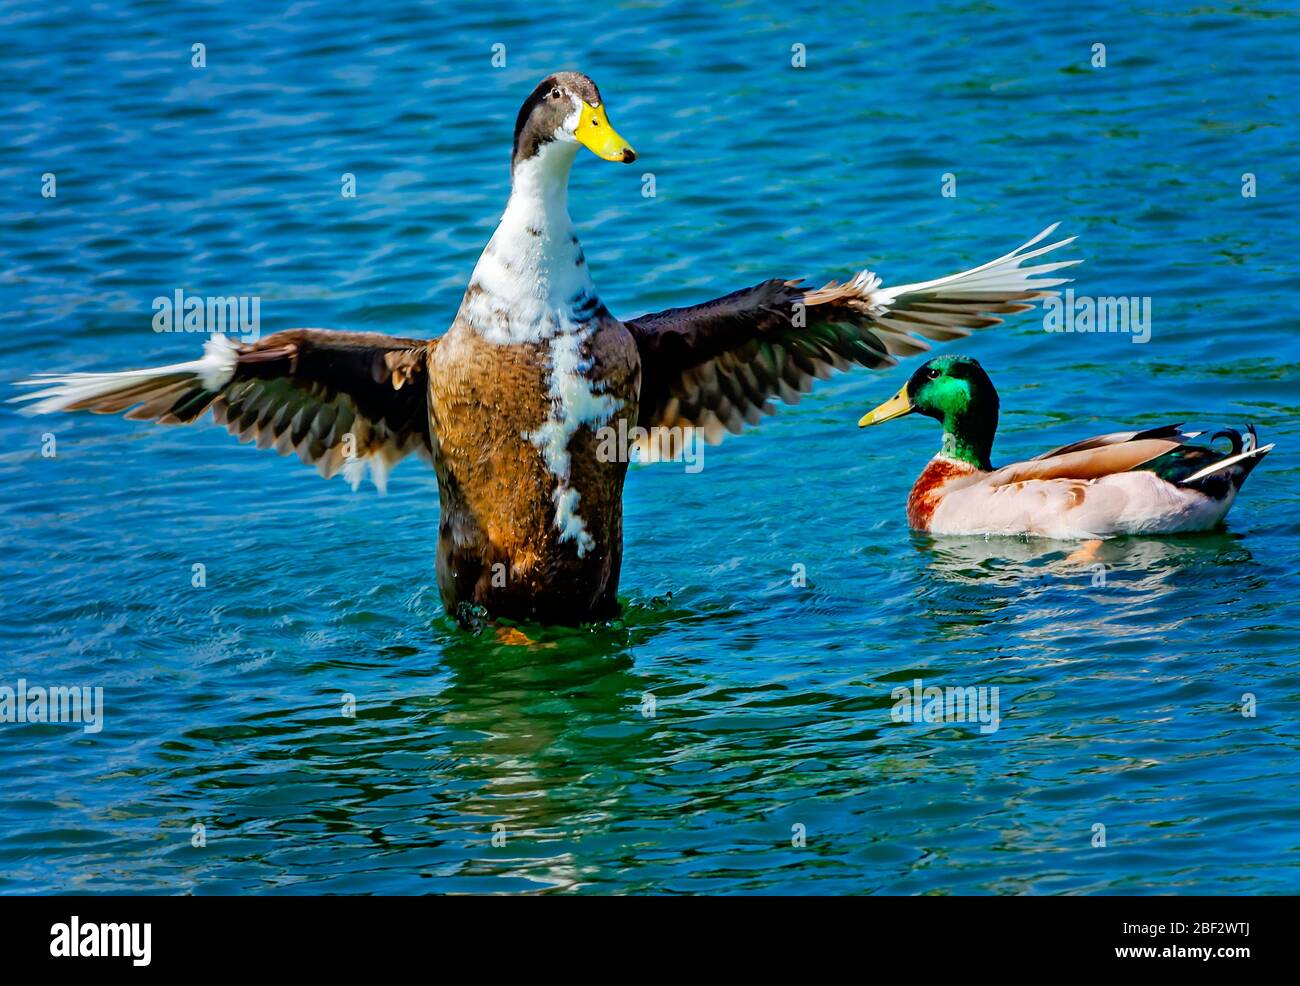 A mallard duck spreads its wings as another mallard swims beside it, March 26, 2020, in Pascagoula, Mississippi. Stock Photo